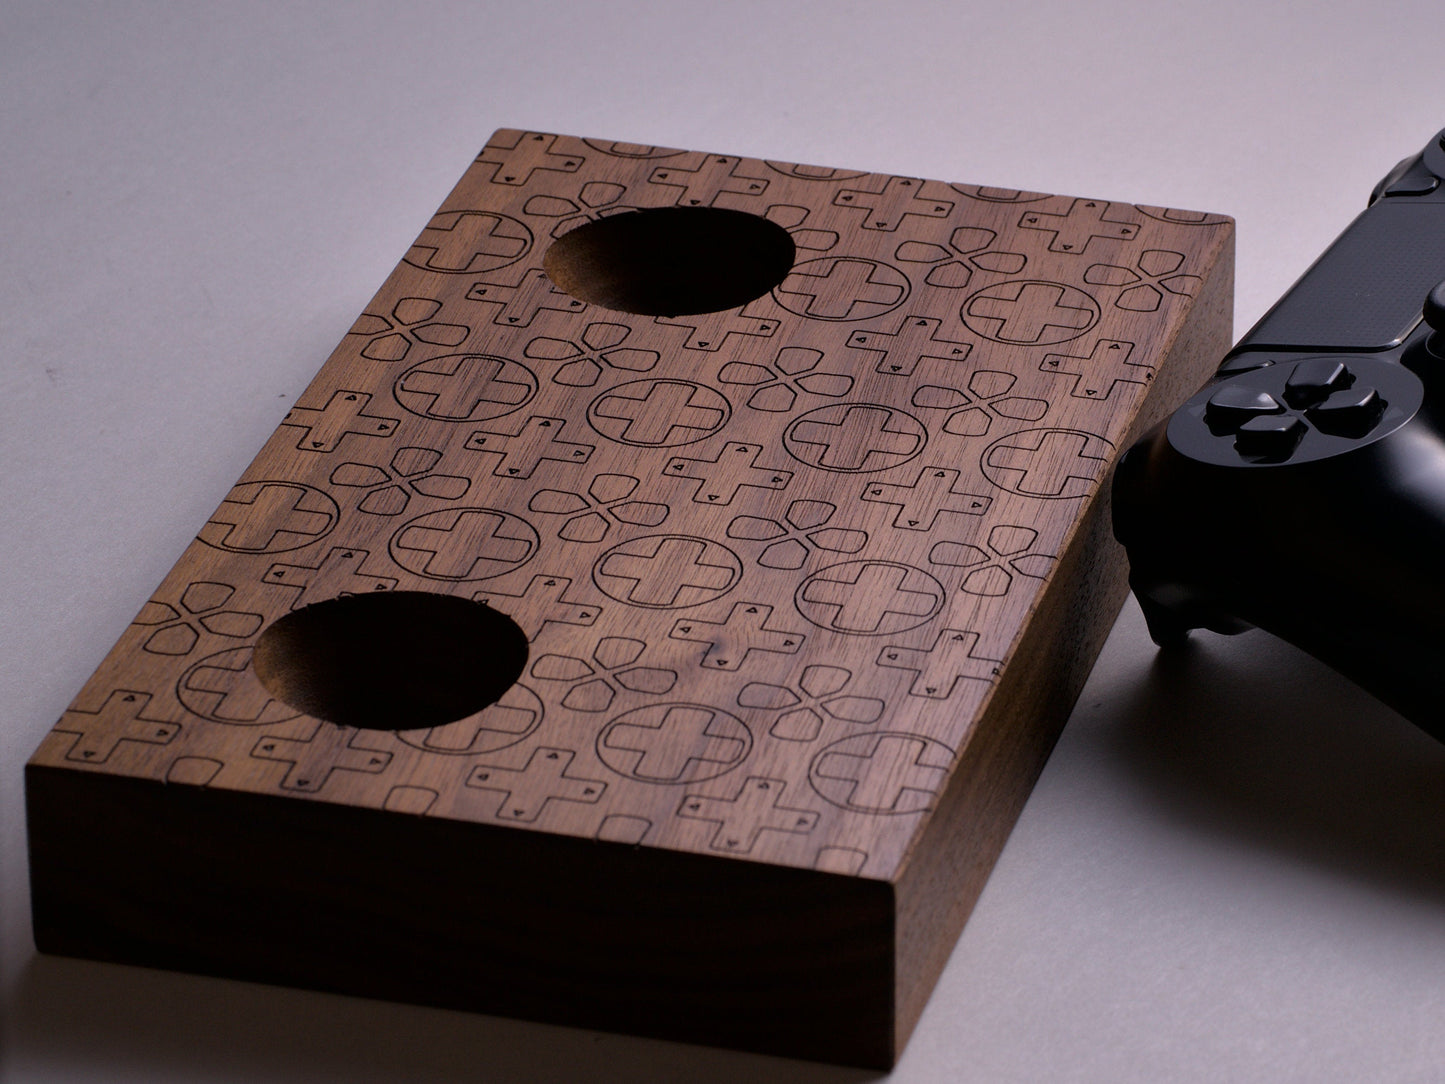 Wooden stand with d-pad design for Playstation 4 dualshock controller